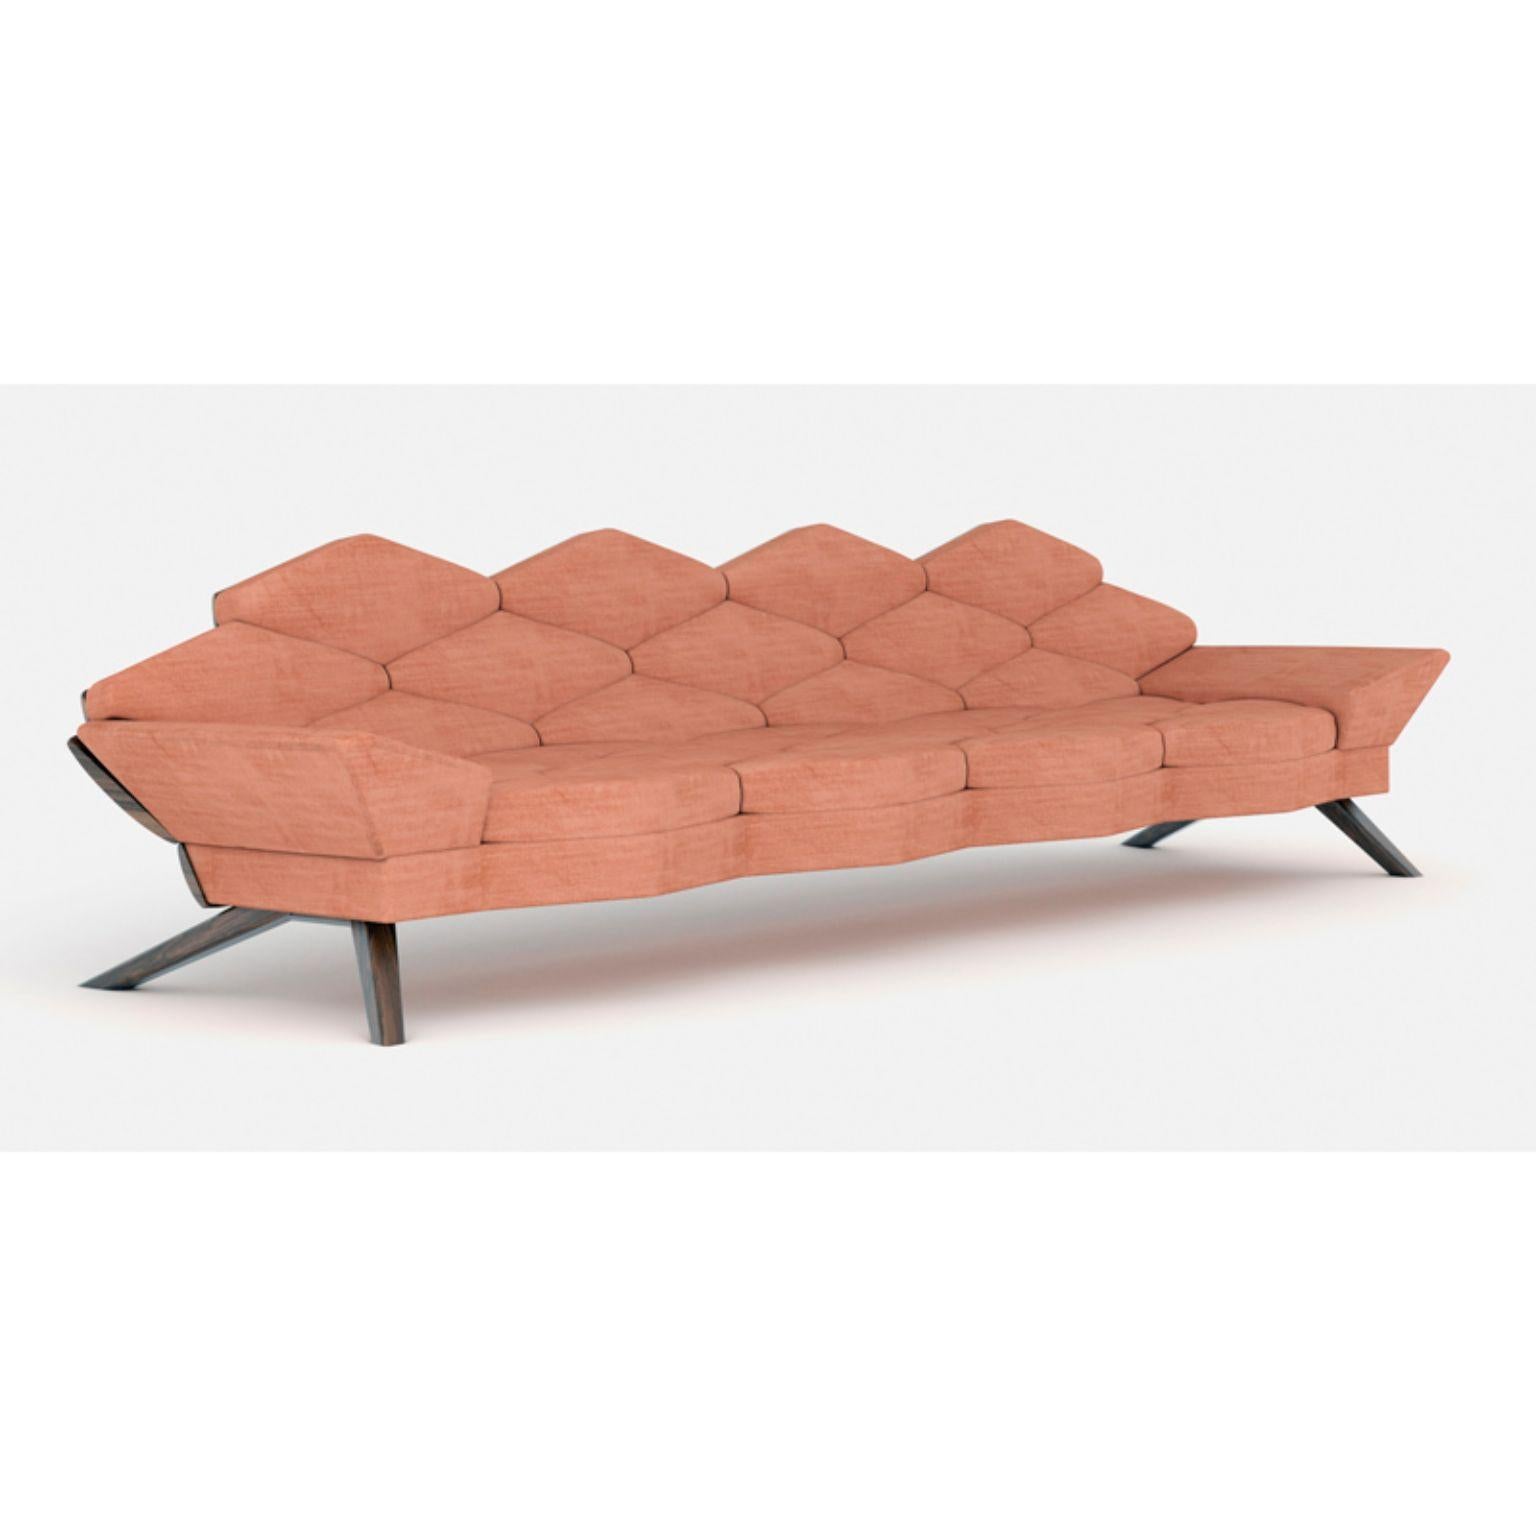 Hive Sofa 400 by Alexandre Caldas
Dimensions: W 400 x D 100 x H 75 cm
Materials: Solid walnut wood, fabric

Materials available in ash, mutene, walnut
Seat available in fabric, leather, corkfabric
Sound system integrated with bluetooth